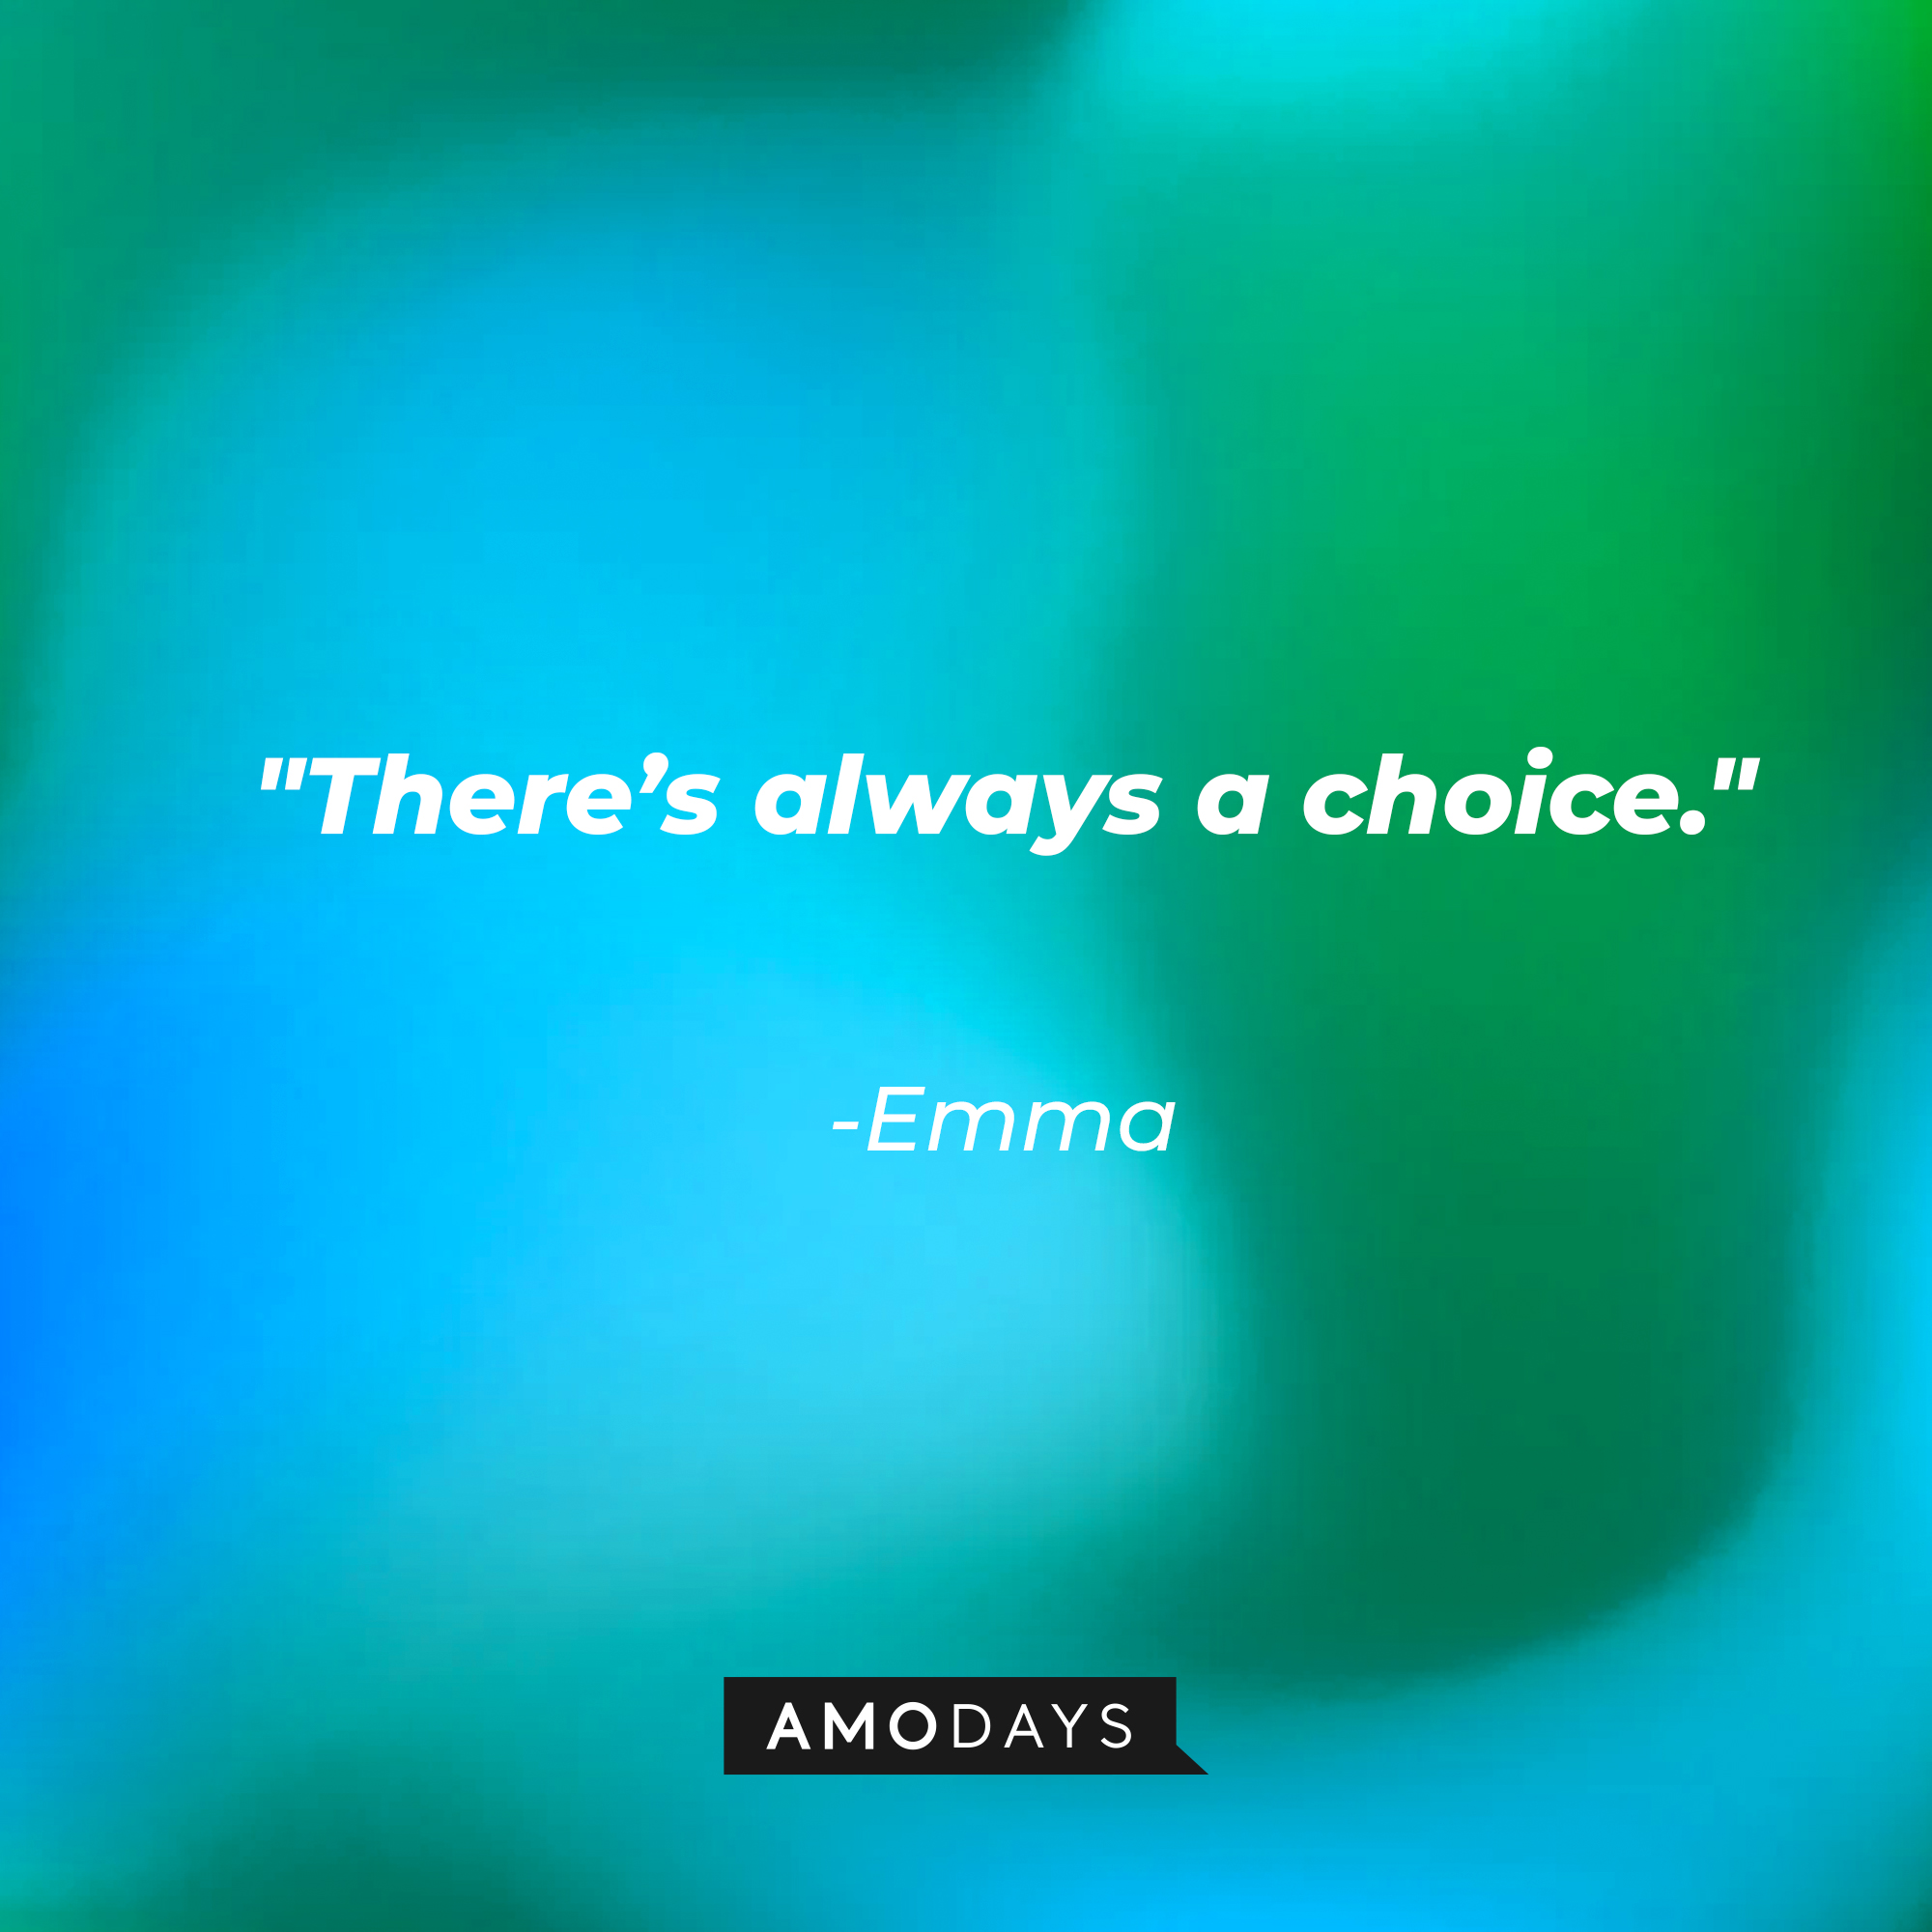 Emma's quote: "There's always a choice." | Source: Amodays